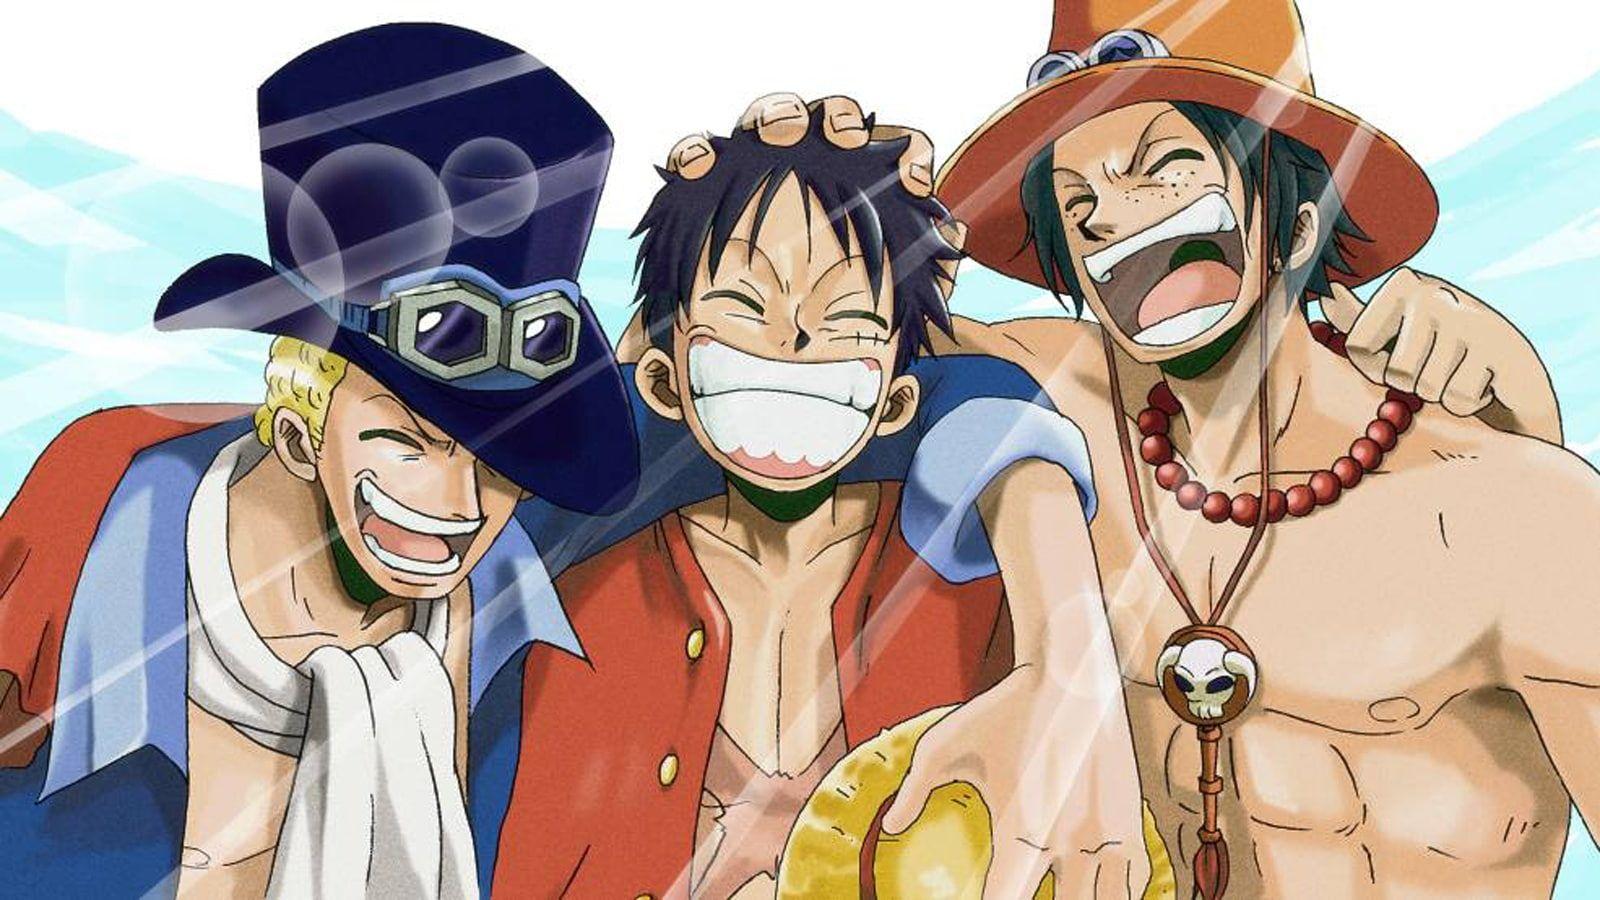 Ace and Luffy Wallpapers - Top Free Ace and Luffy ...